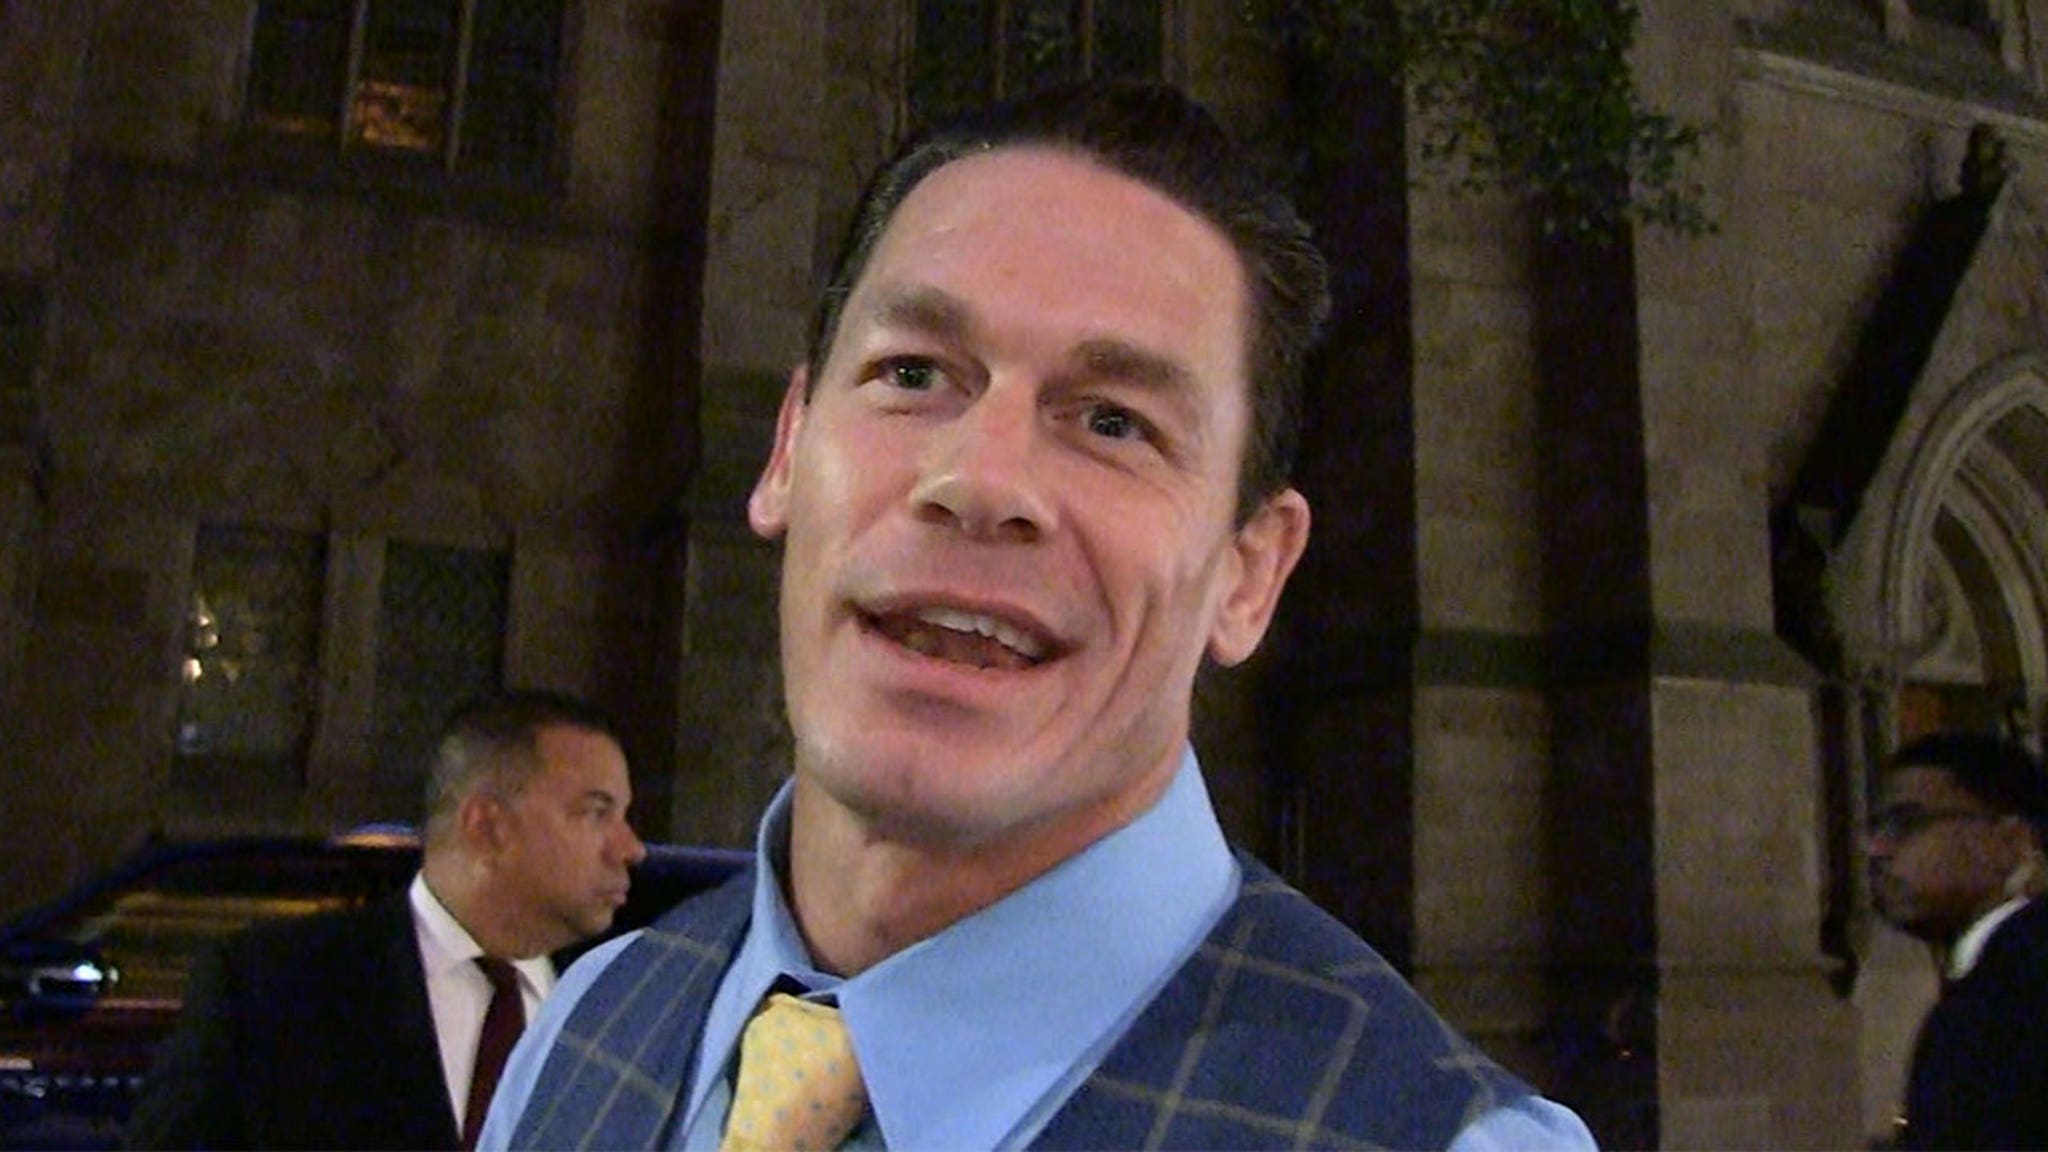 John Cena fulfills the fantasy of a disabled teenager after fleeing Ukraine to meet